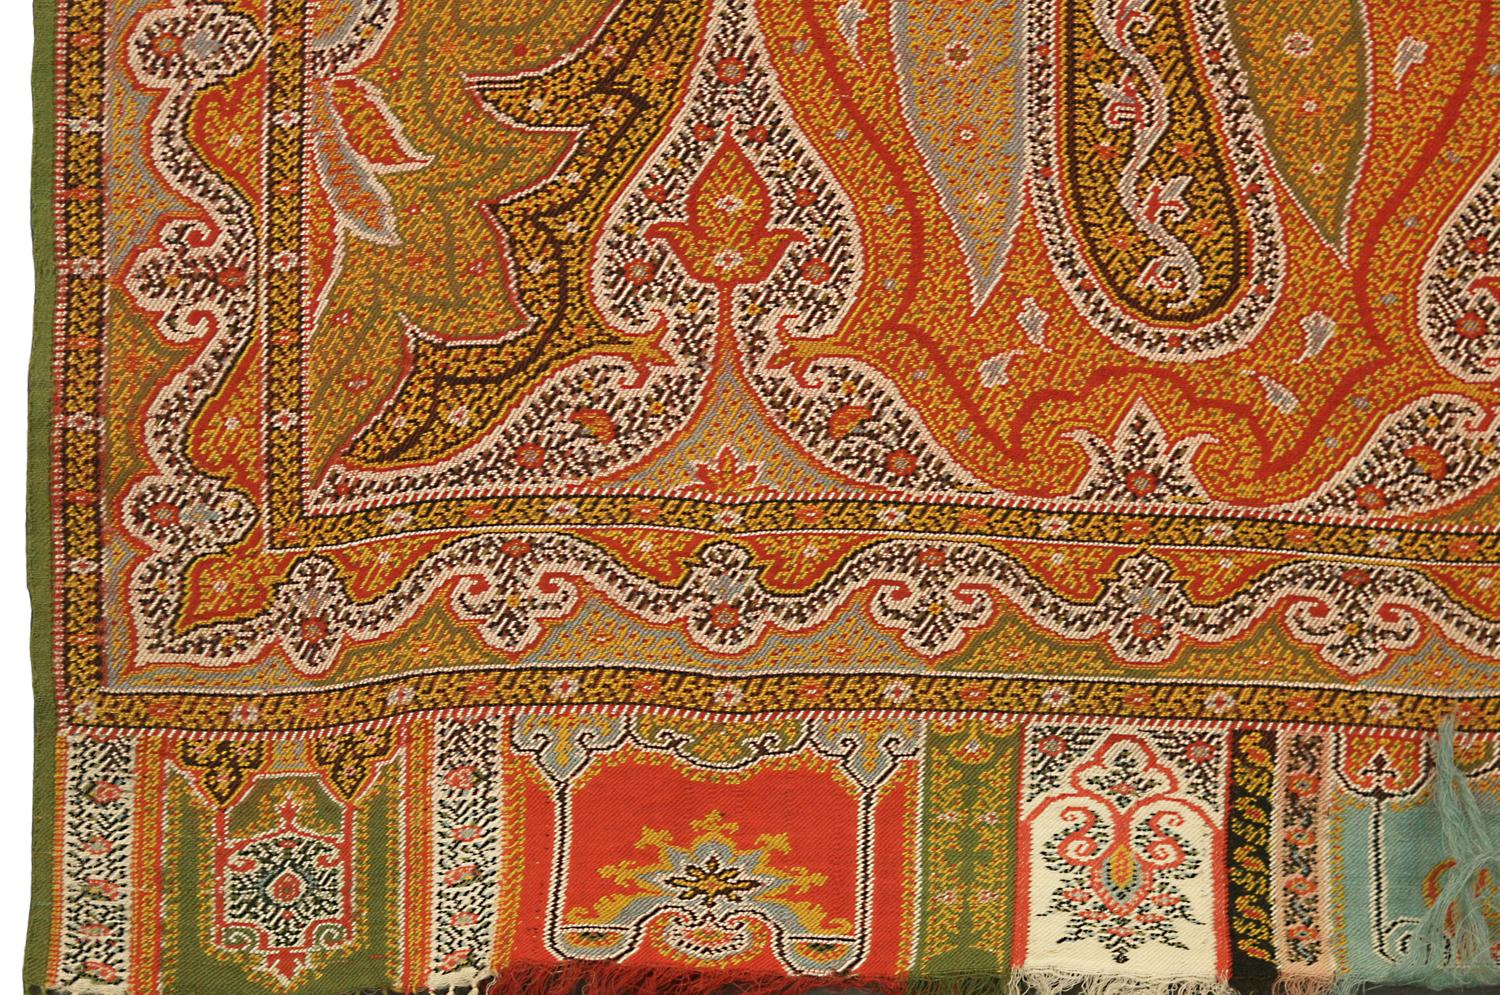 This is an extra-large antique Indian Kashmir textile woven during the end of the 19th-century circle 1900 and measures 310 x 162 cm in size. This piece highly utilizes the famous Paisley motif which can be found in an extra-large size at both ends